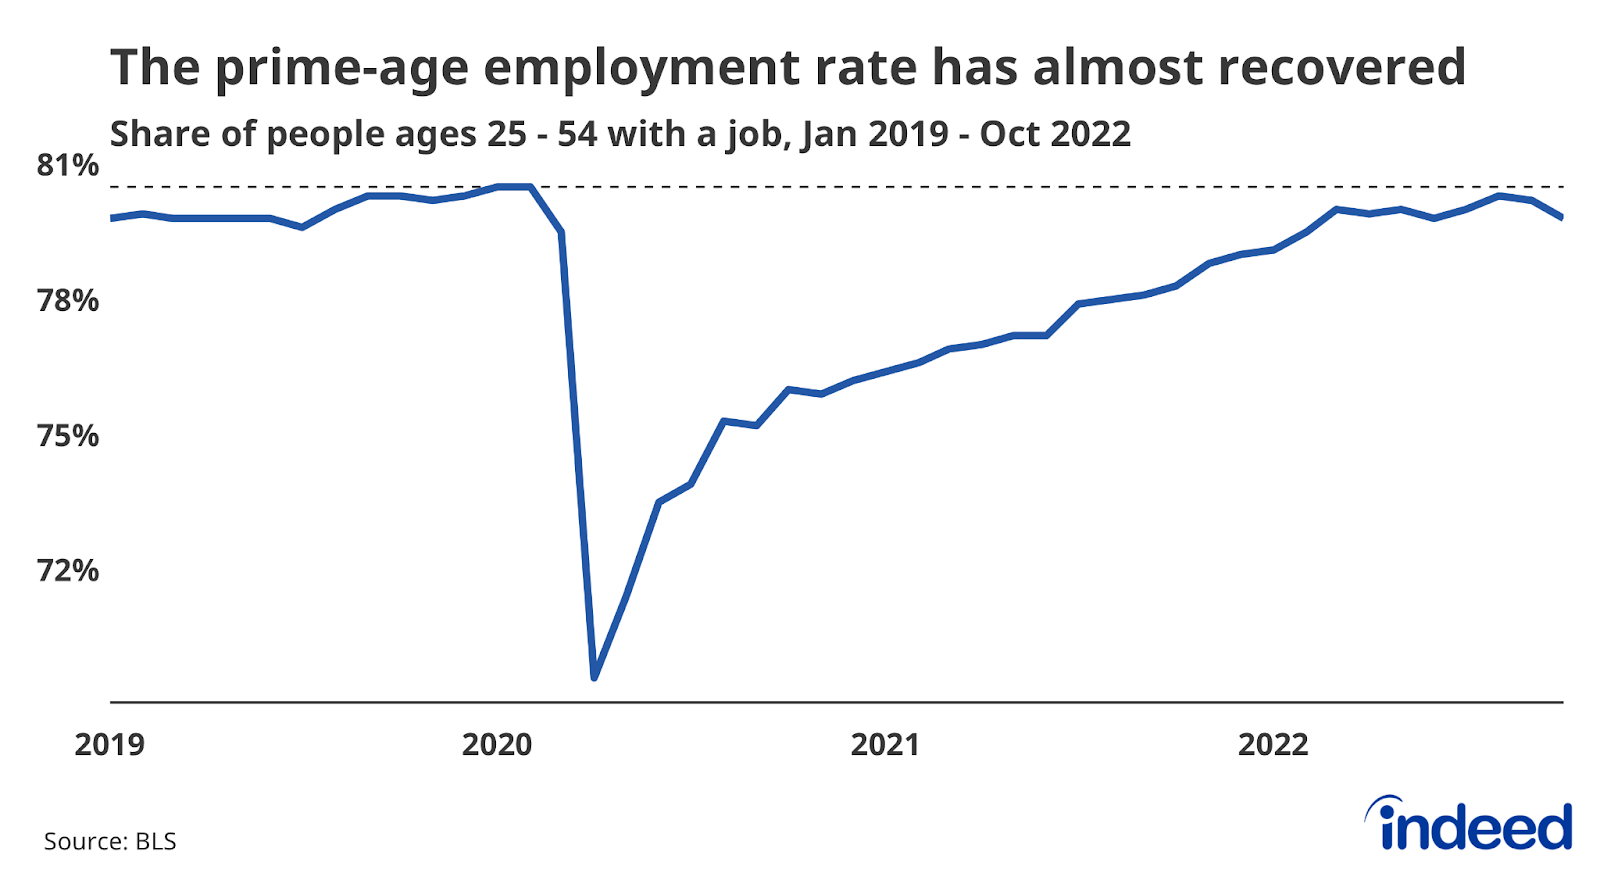 Line graph titled “The prime-age employment rate is almost fully recovered” with a vertical axis ranging from 72 to 81, tracking the share of the population ages 25 to 54 with a job.